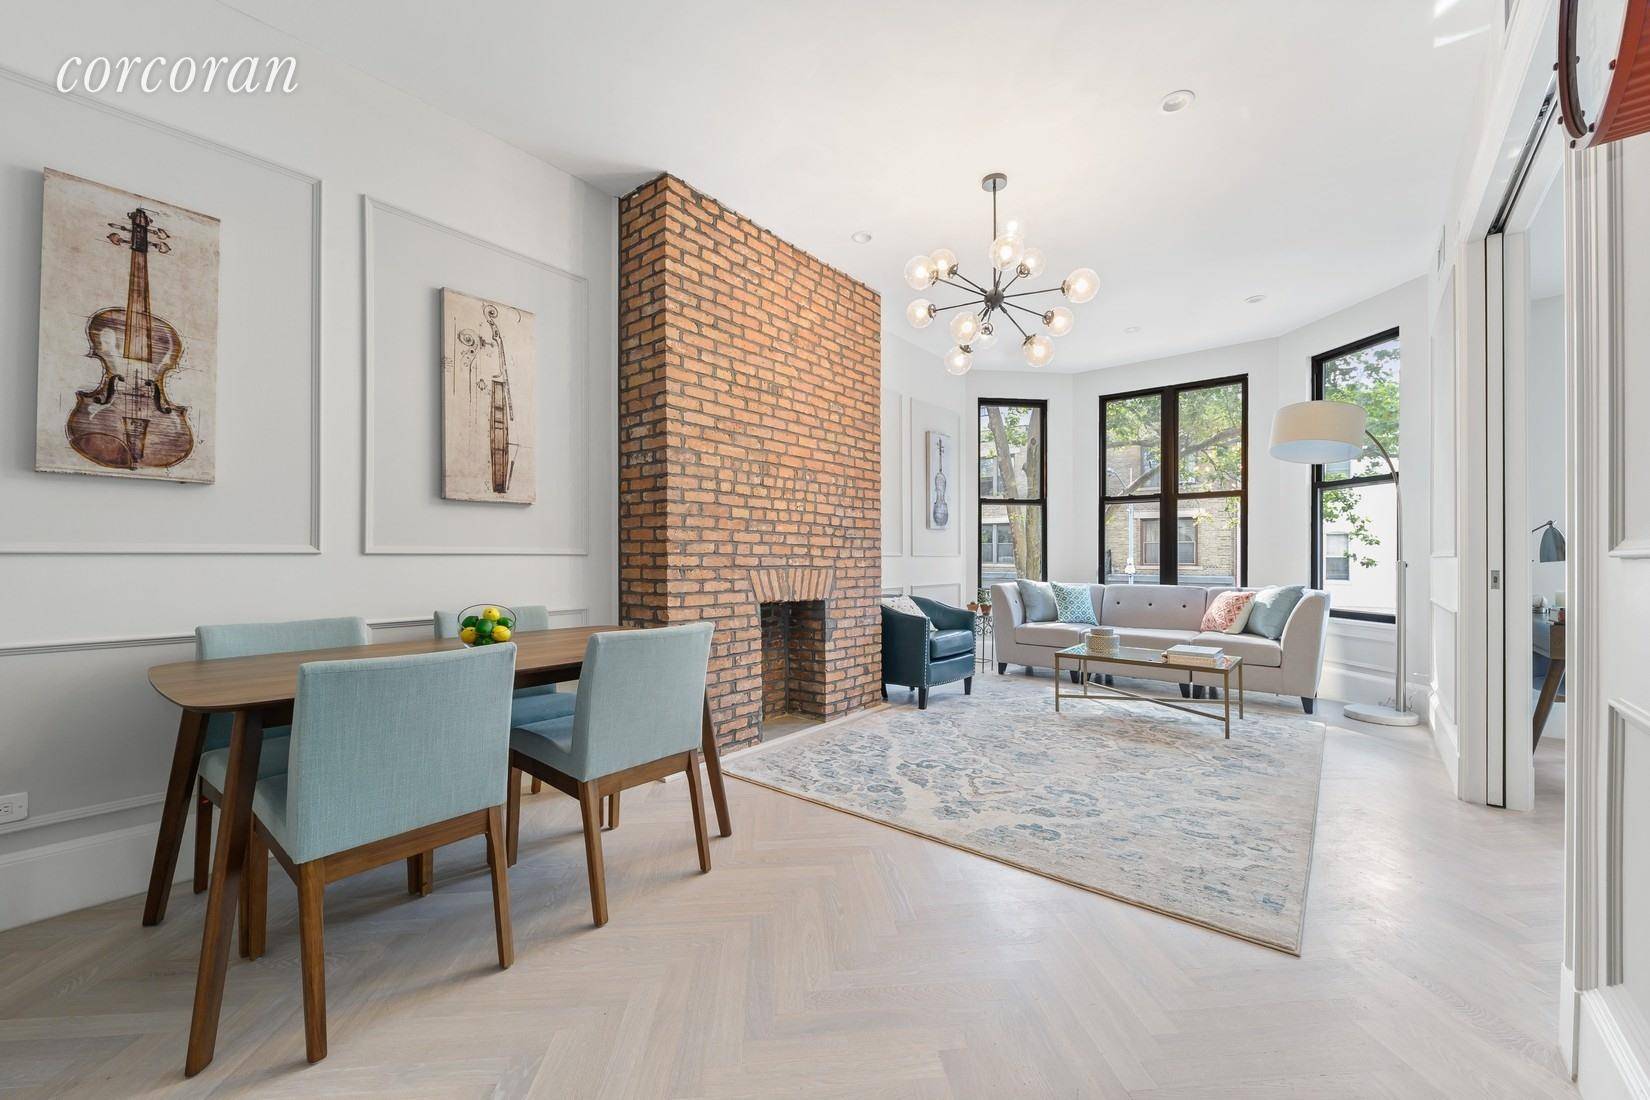 By Private or Virtual Appointment Only 68 Grove is the rare condominium conversion building truly worthy of its Mansion neighbors on Bushwick Avenue.